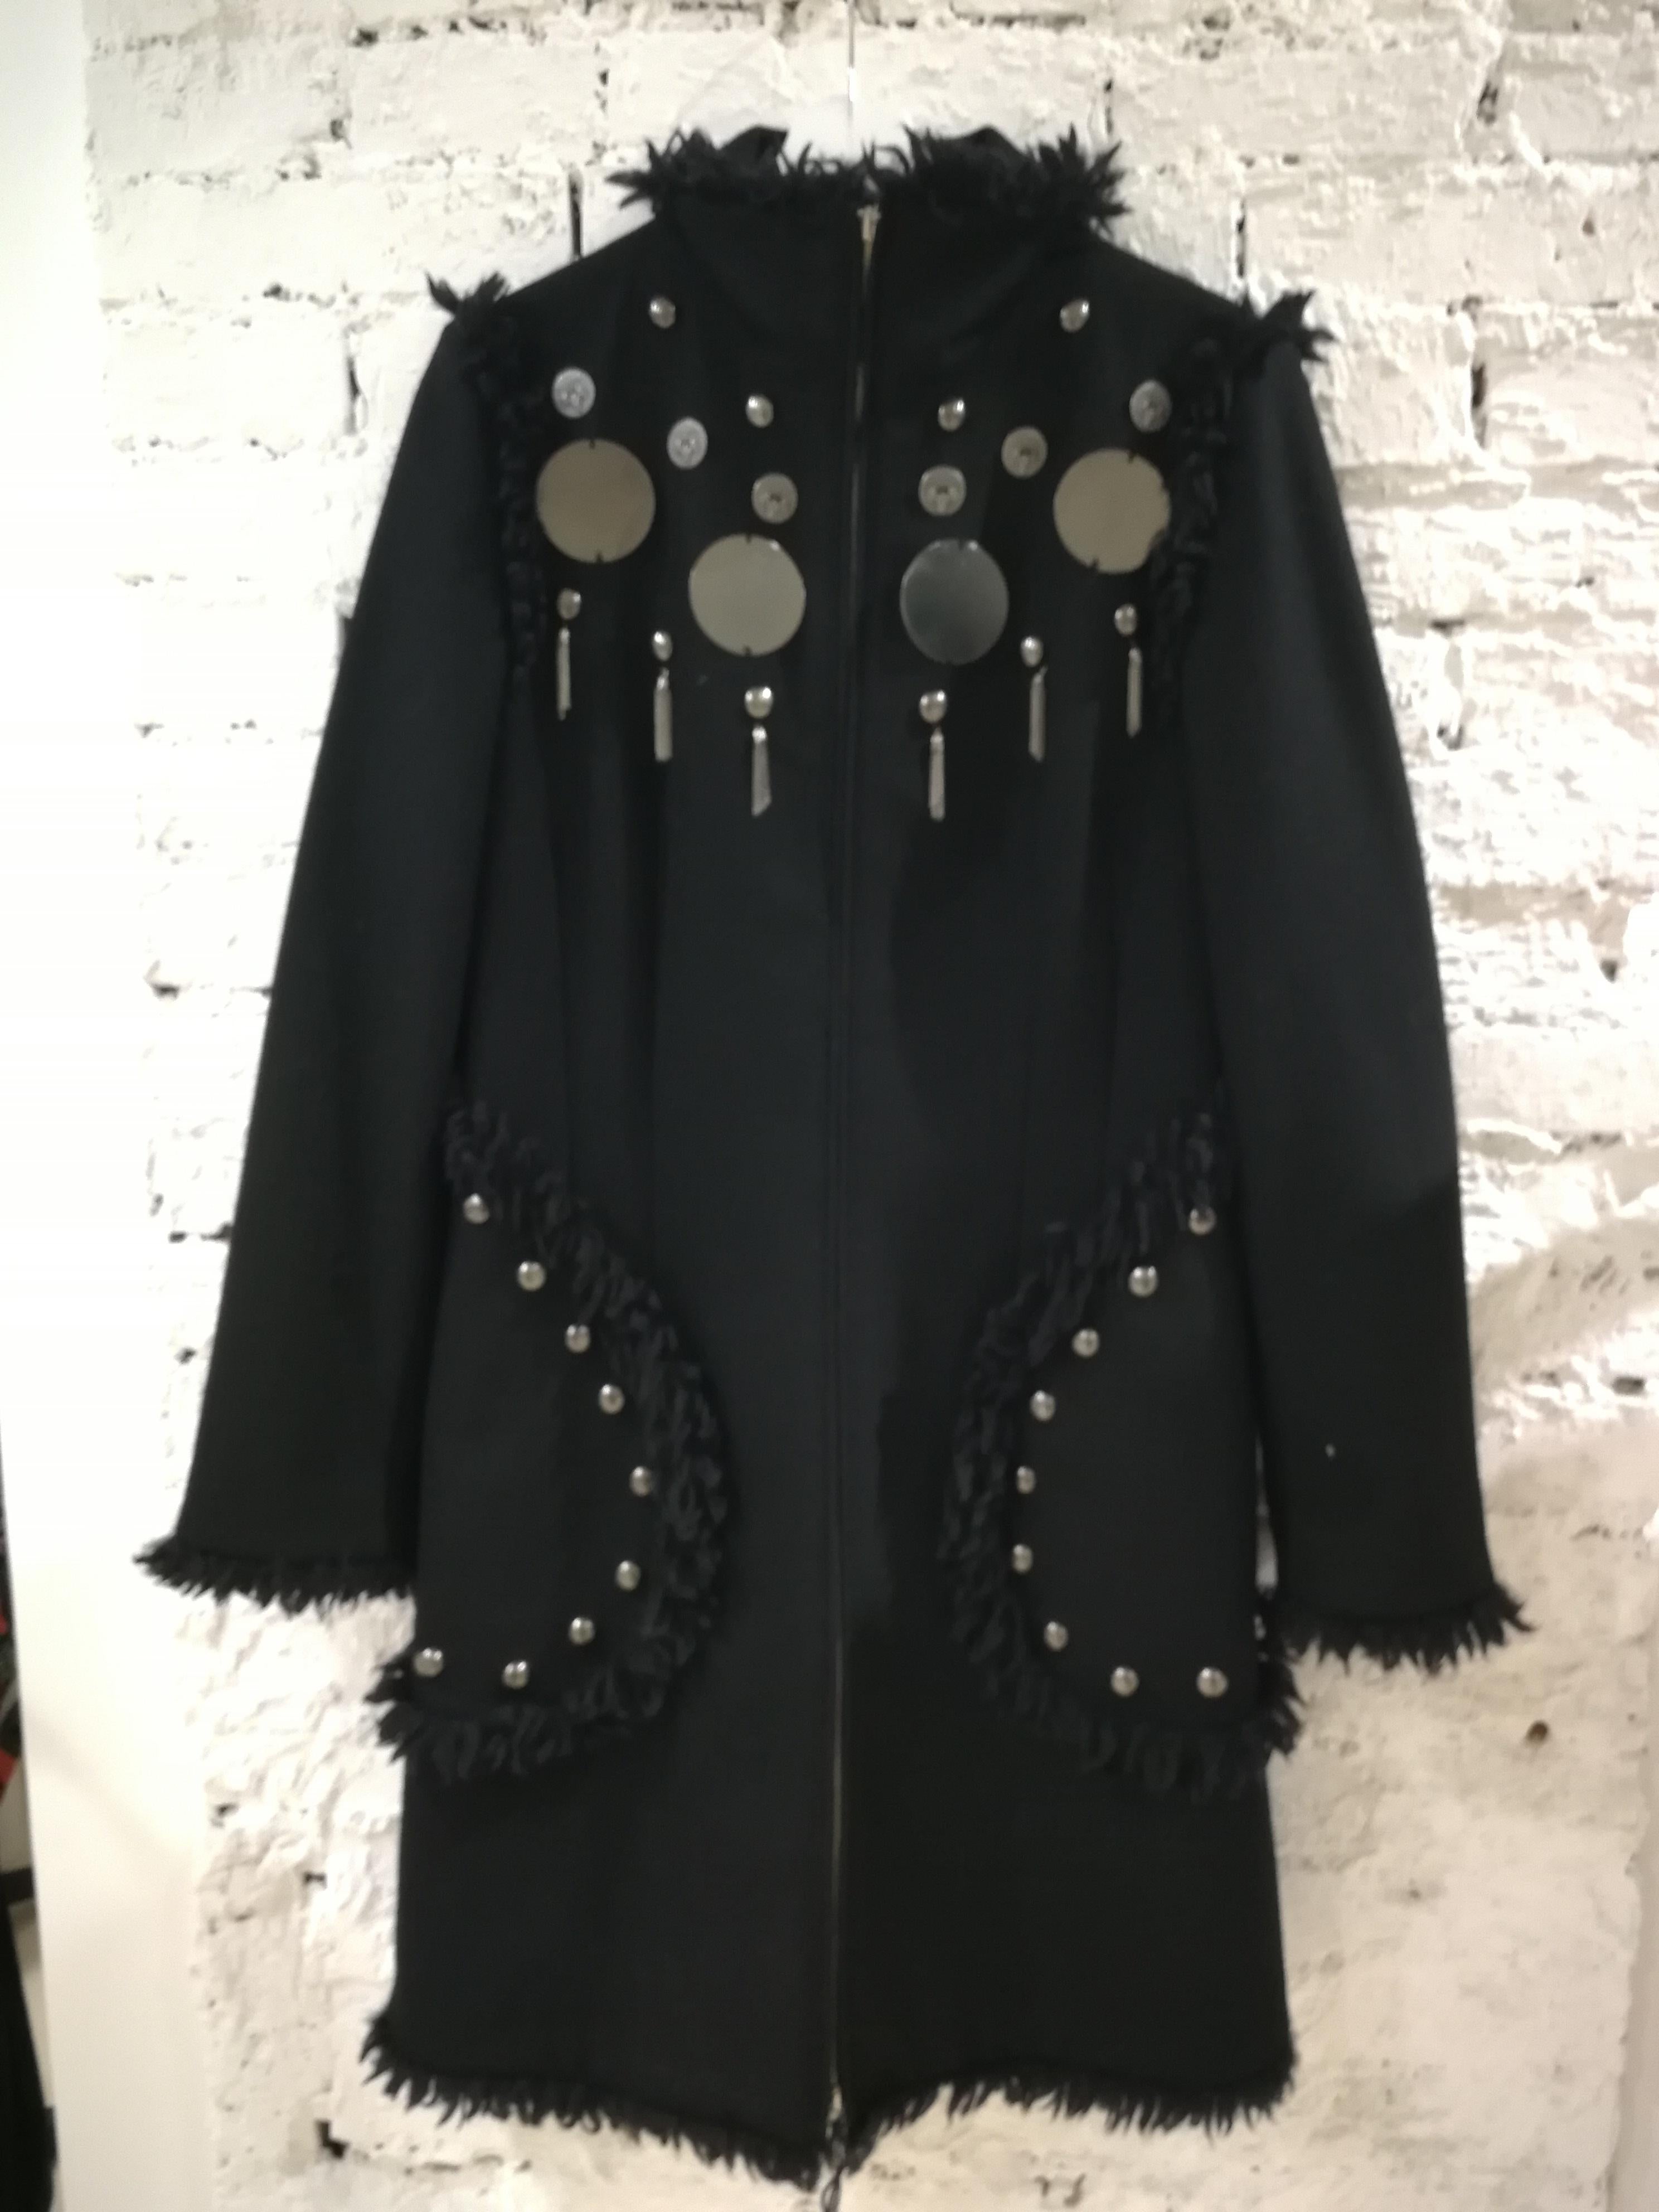 Moschino Jeans Silver tone Studs Black Wool Coat 7